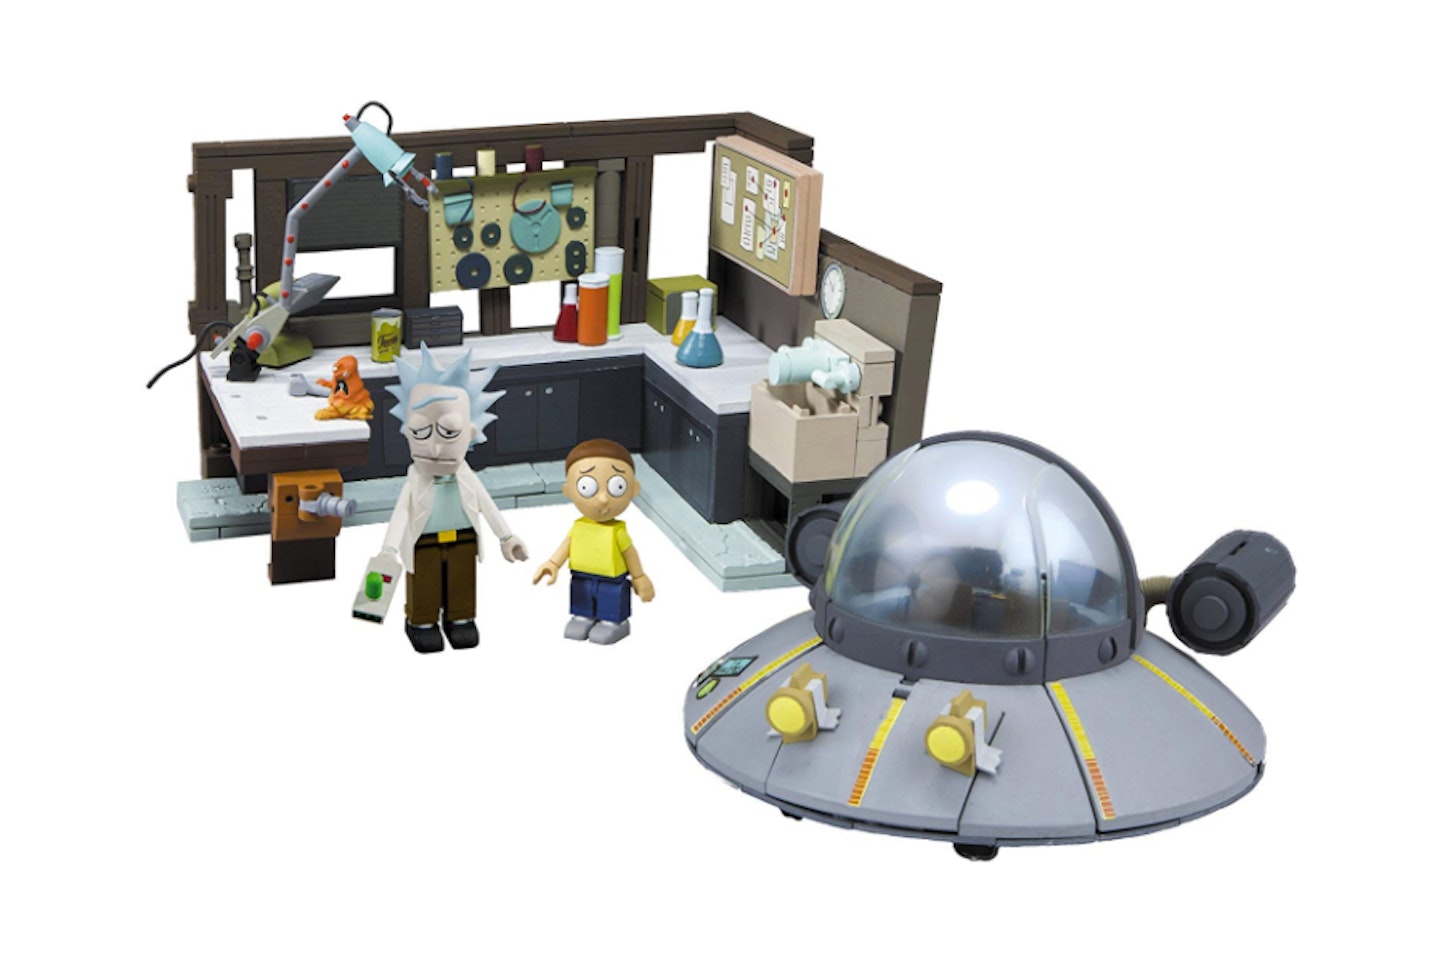 Rick and Morty Spaceship and Garage Construction Set, £20.48